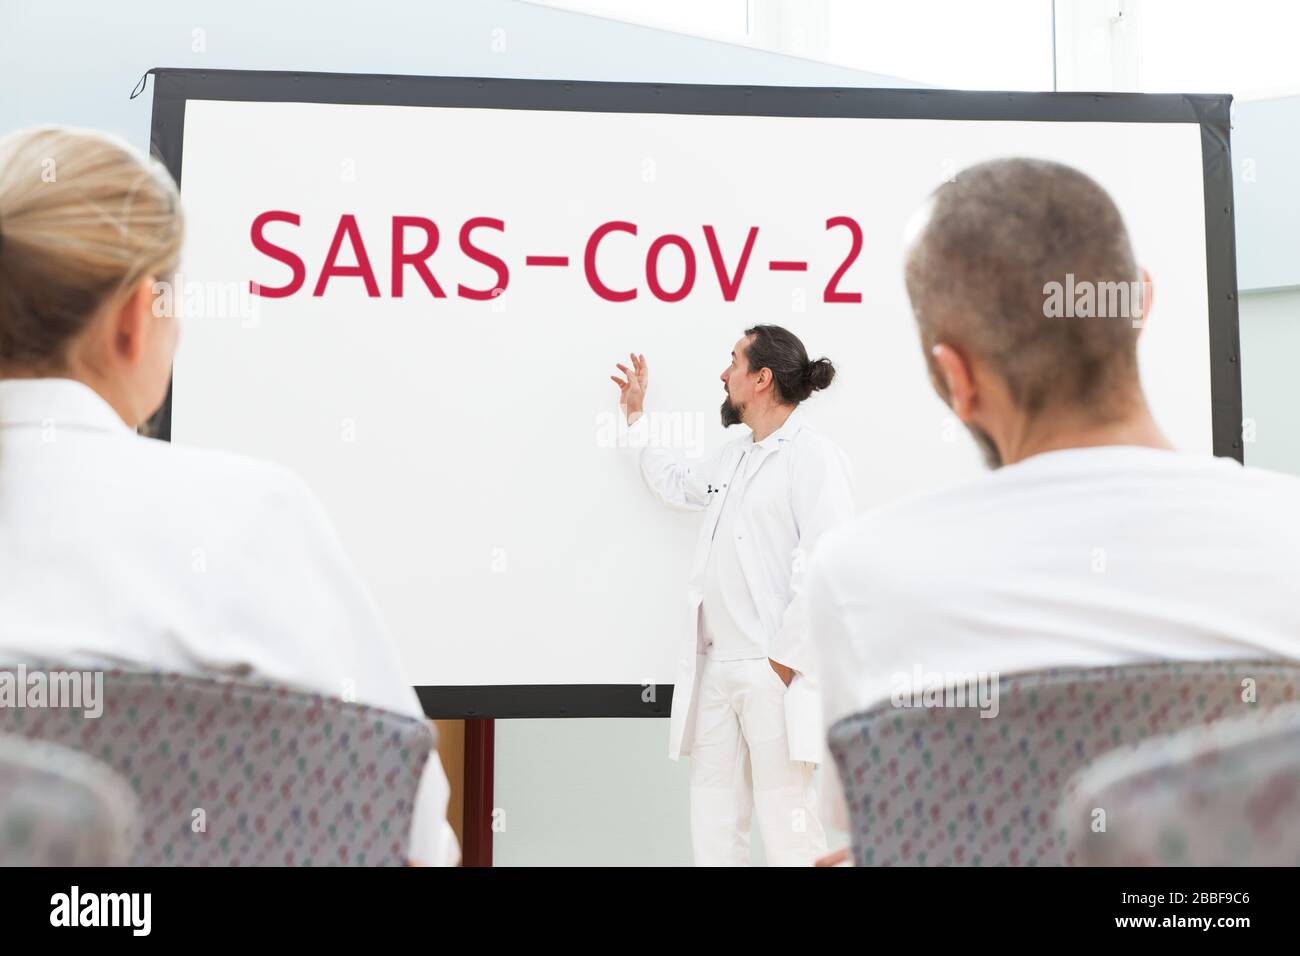 a conference or meeting with brainstorming of a group of hospital staff or scientists, concept corona virus or covid-19, sars-cov-2 Stock Photo